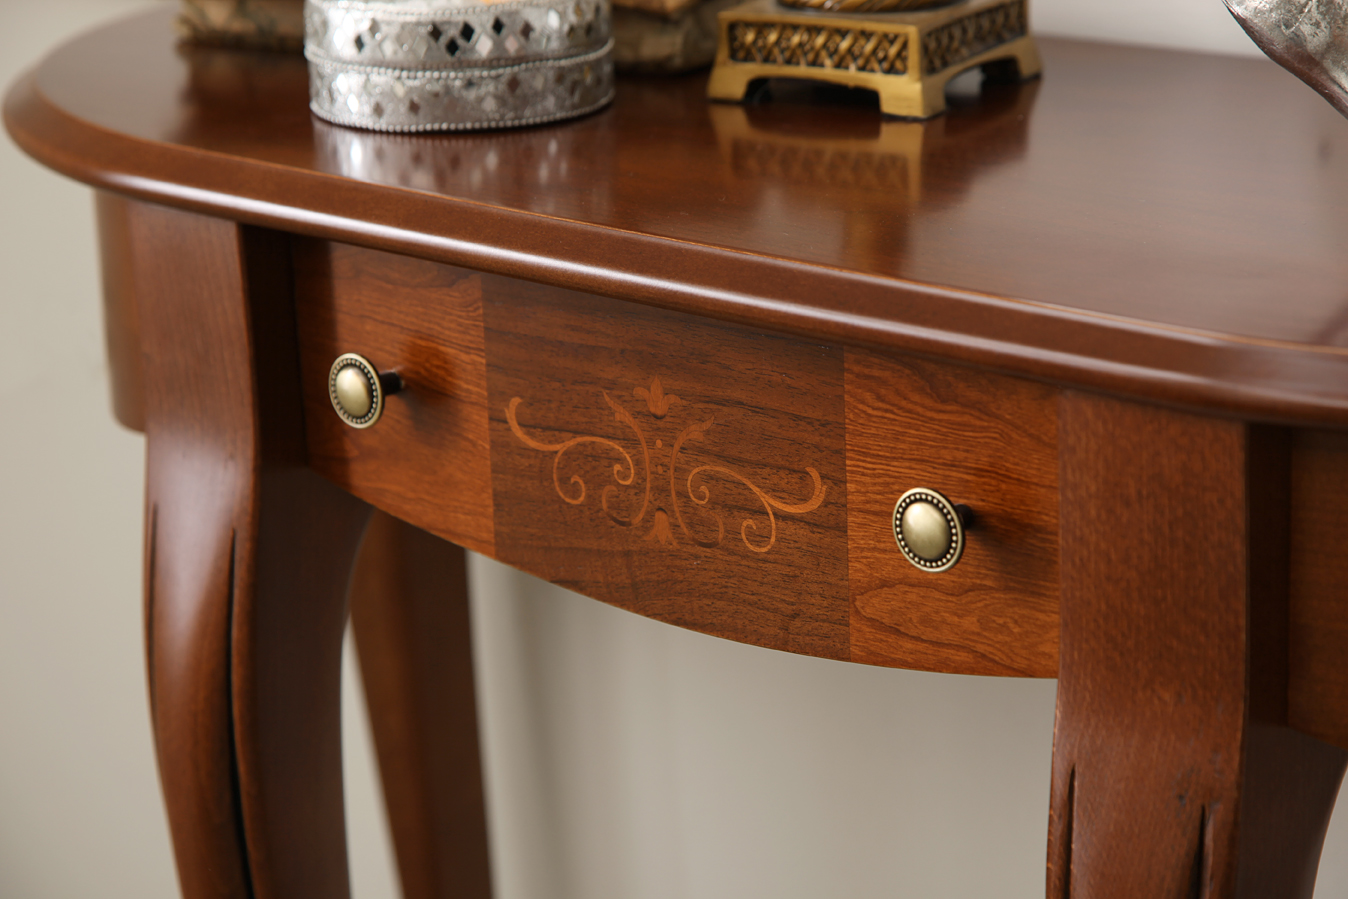 Charming finishes and ornaments for bringing elegance & refinement to your hallway décor